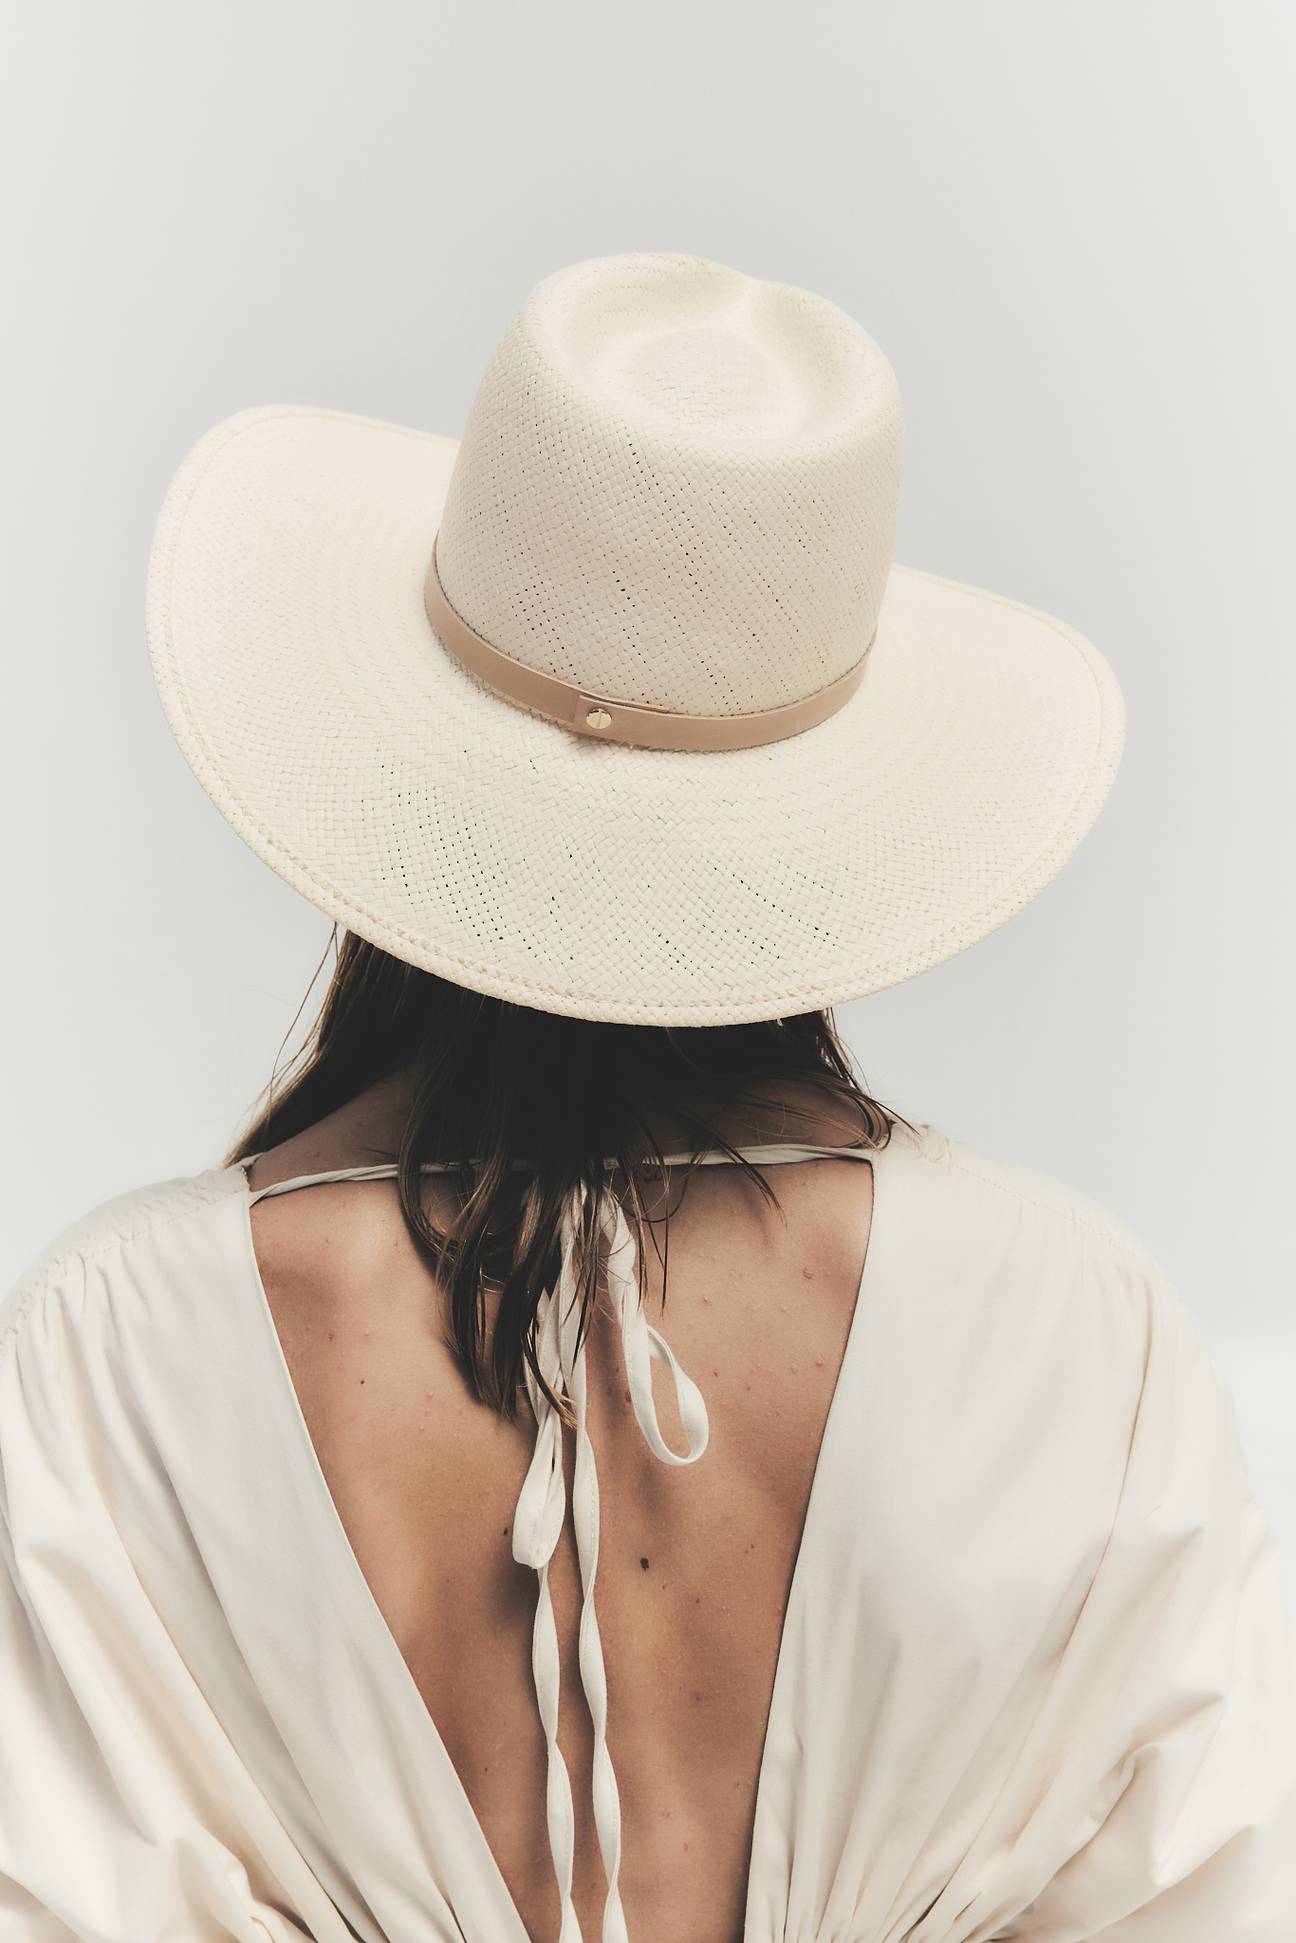 The Janessa Leone Sherman Hat in Natural available at The New Trend Australia